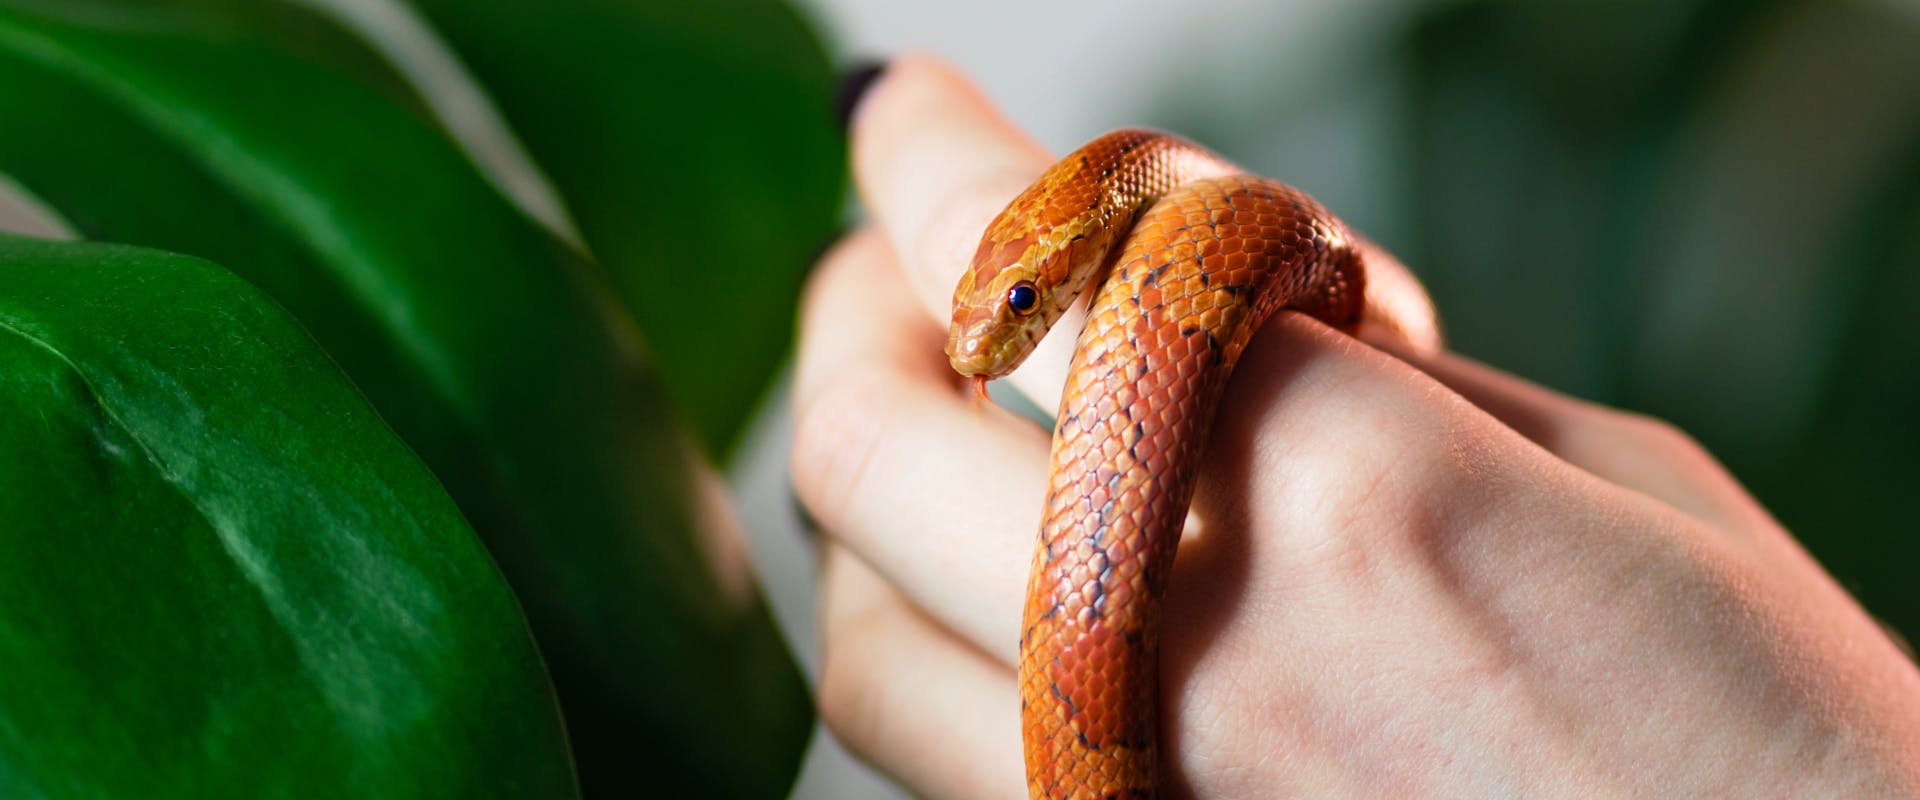 A corn snake is handled by a reptile sitter.